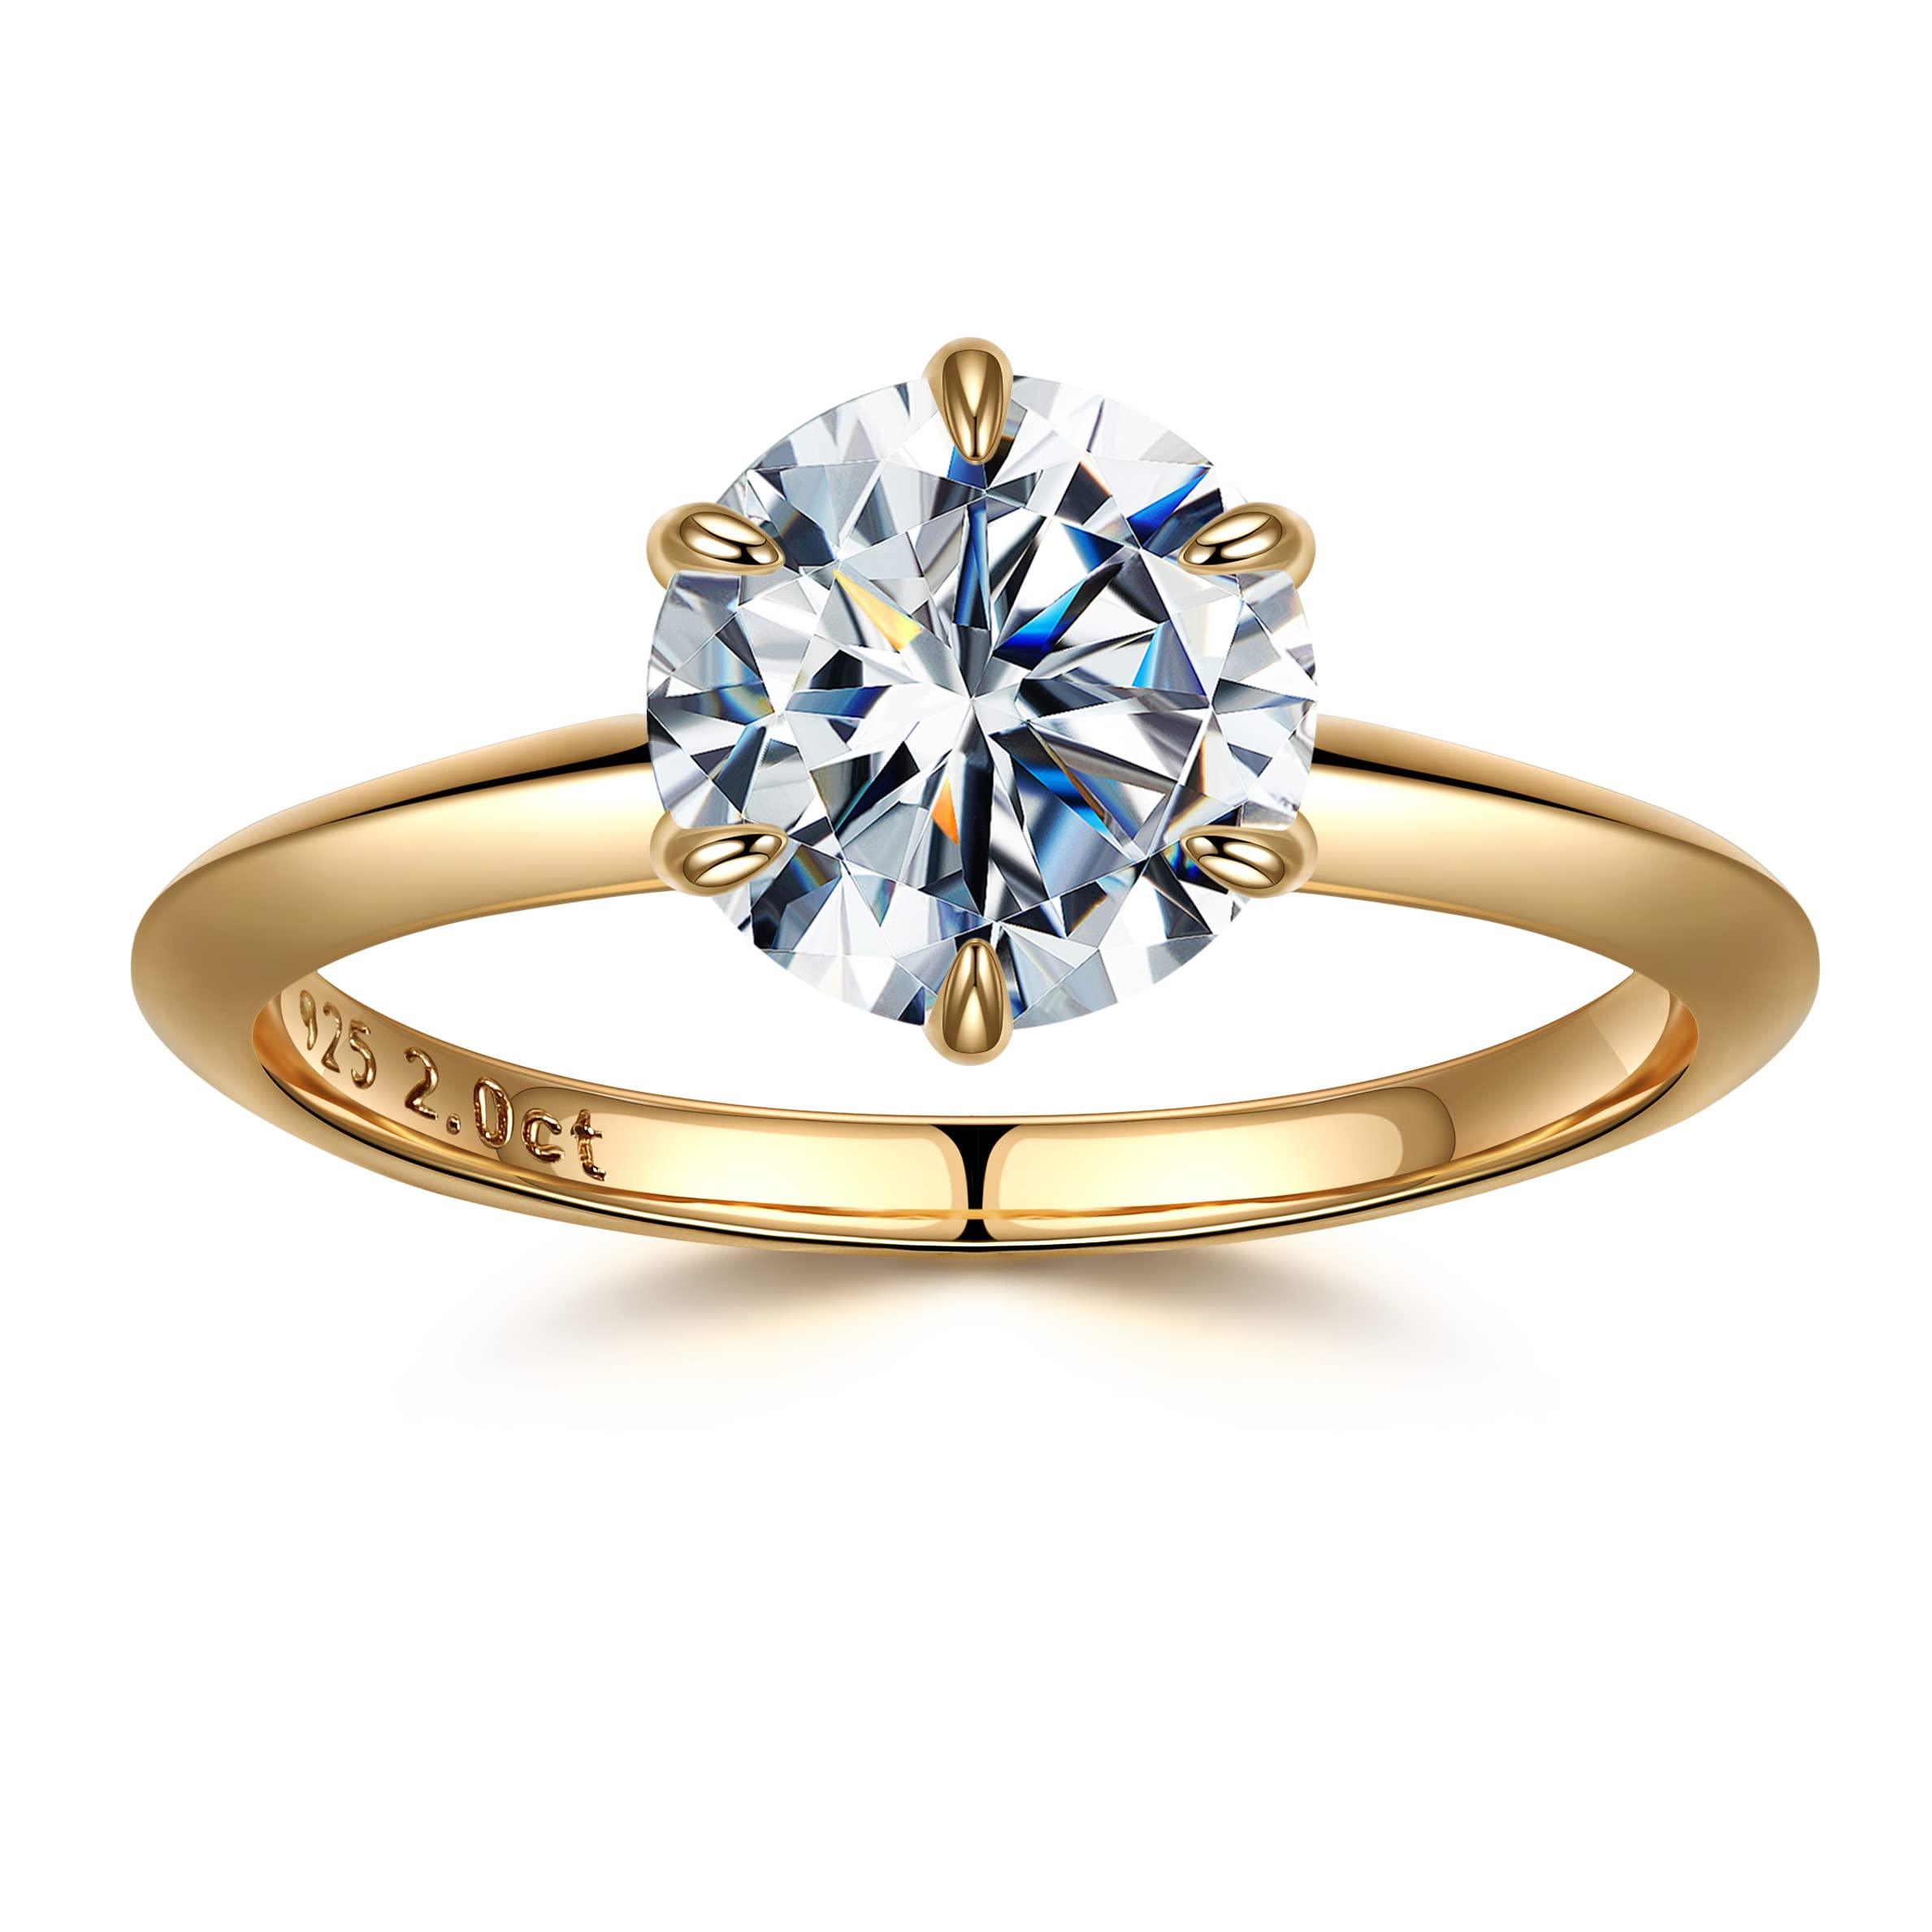 files/smilest-2ct-round-moissanite-solitaire-ring-for-women-d-color-vvs1-clarity-lab-created-diamond-wedding-rings-18k-yellow-gold-plated-s925-sterling-silver-6-claw-moissanite-engagement-ring-for-women-jew.jpg